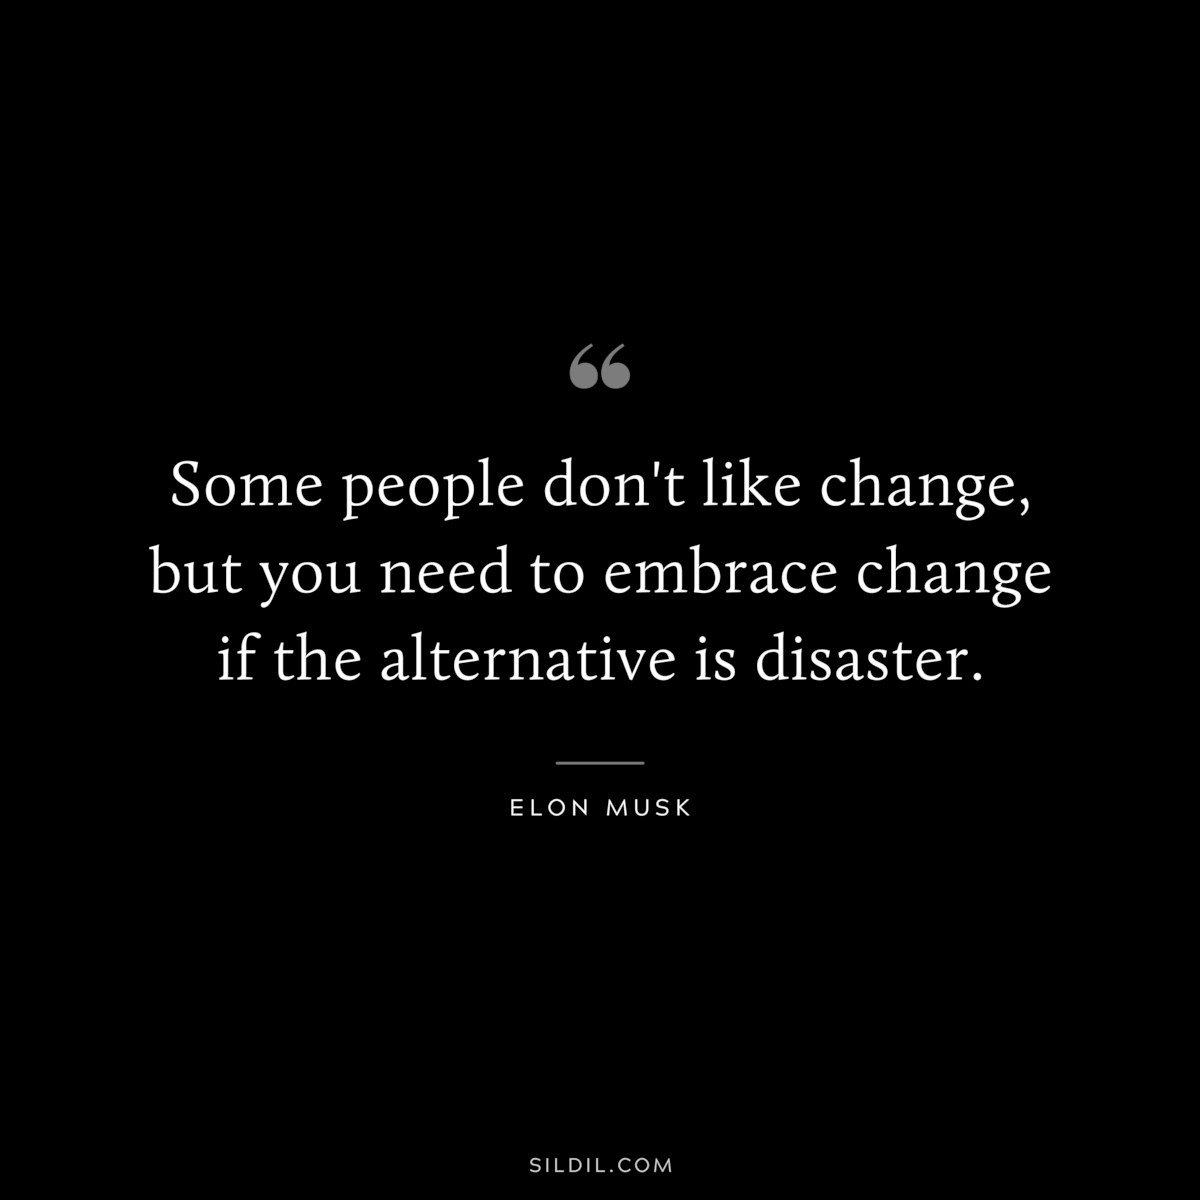 Some people don't like change, but you need to embrace change if the alternative is disaster. ― Elon Musk